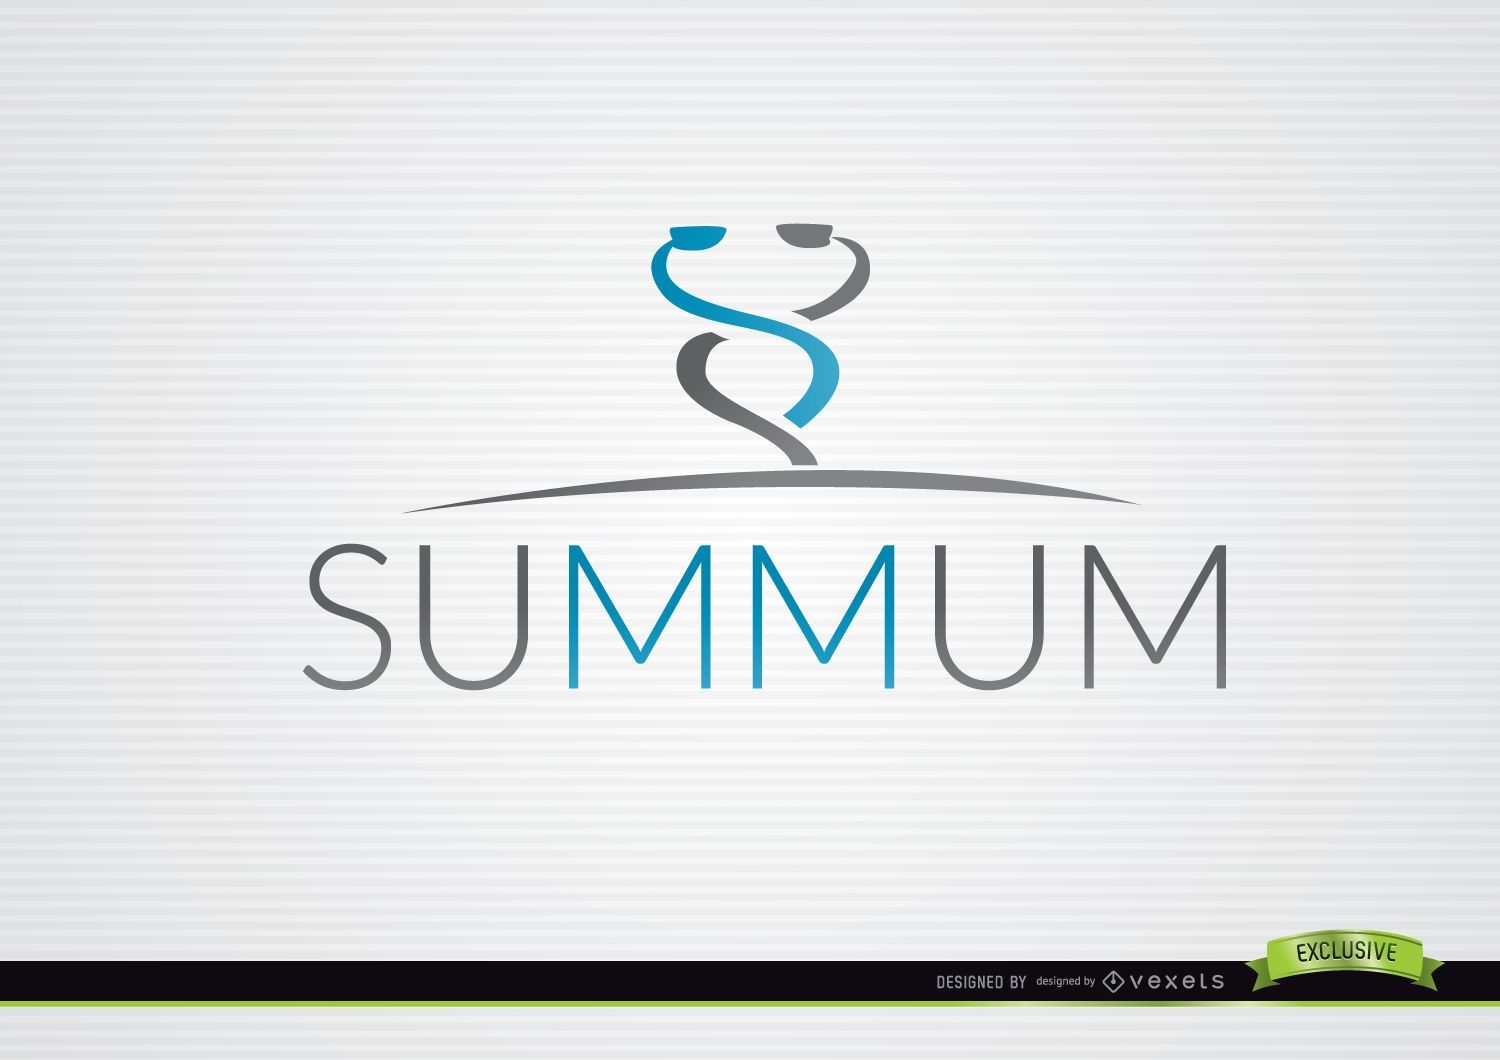 Sumit Projects :: Photos, videos, logos, illustrations and branding ::  Behance